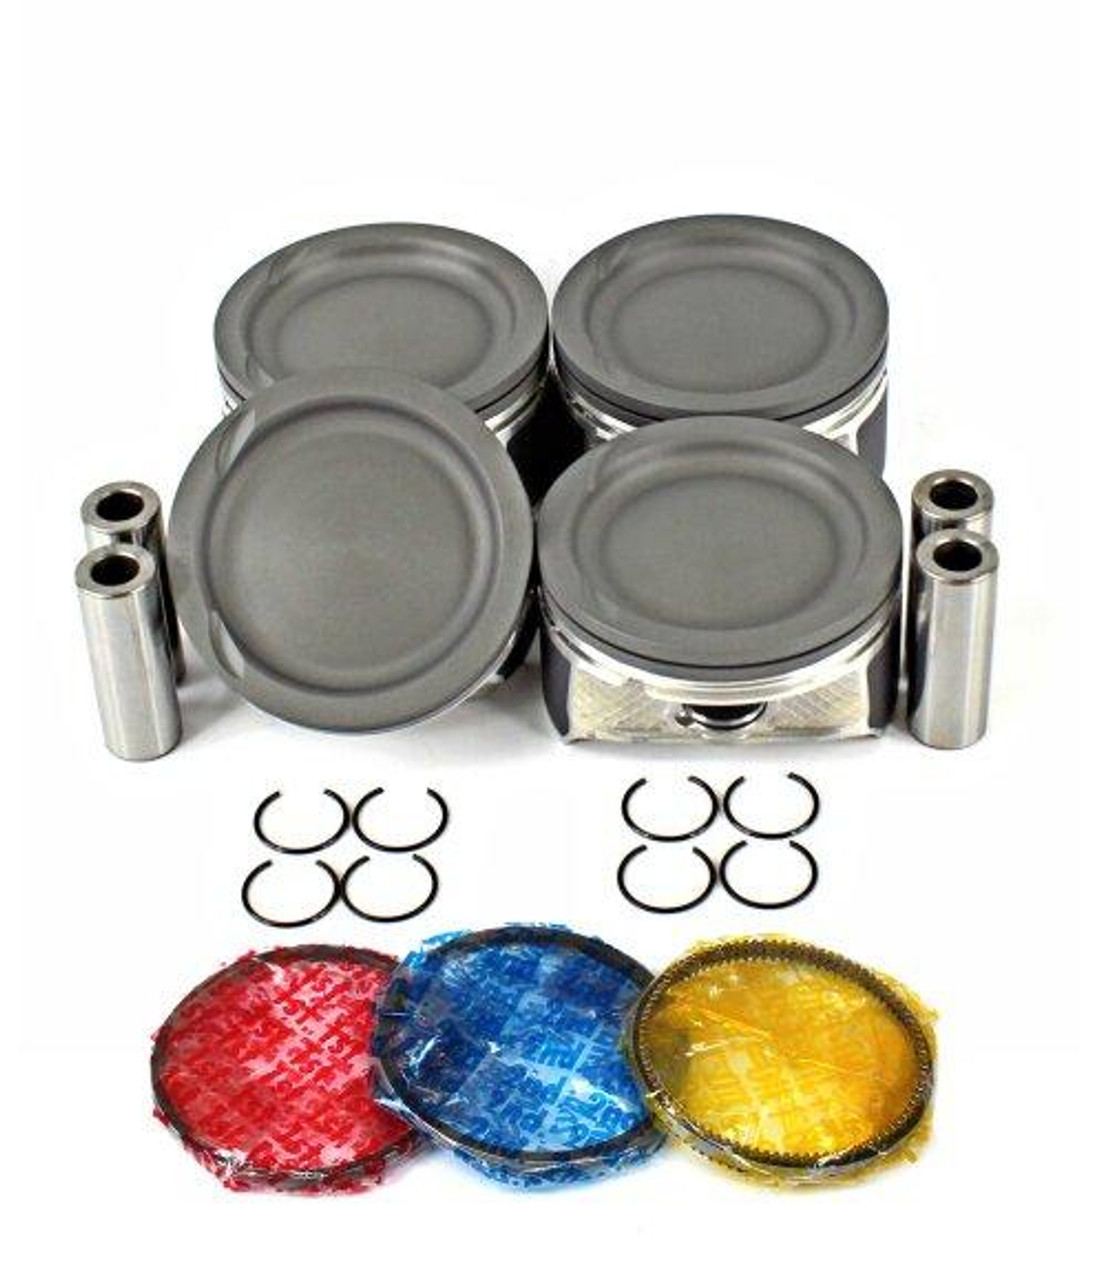 Piston Set with Rings - 2009 Ford Escape 2.5L Engine Parts # PRK484ZE1